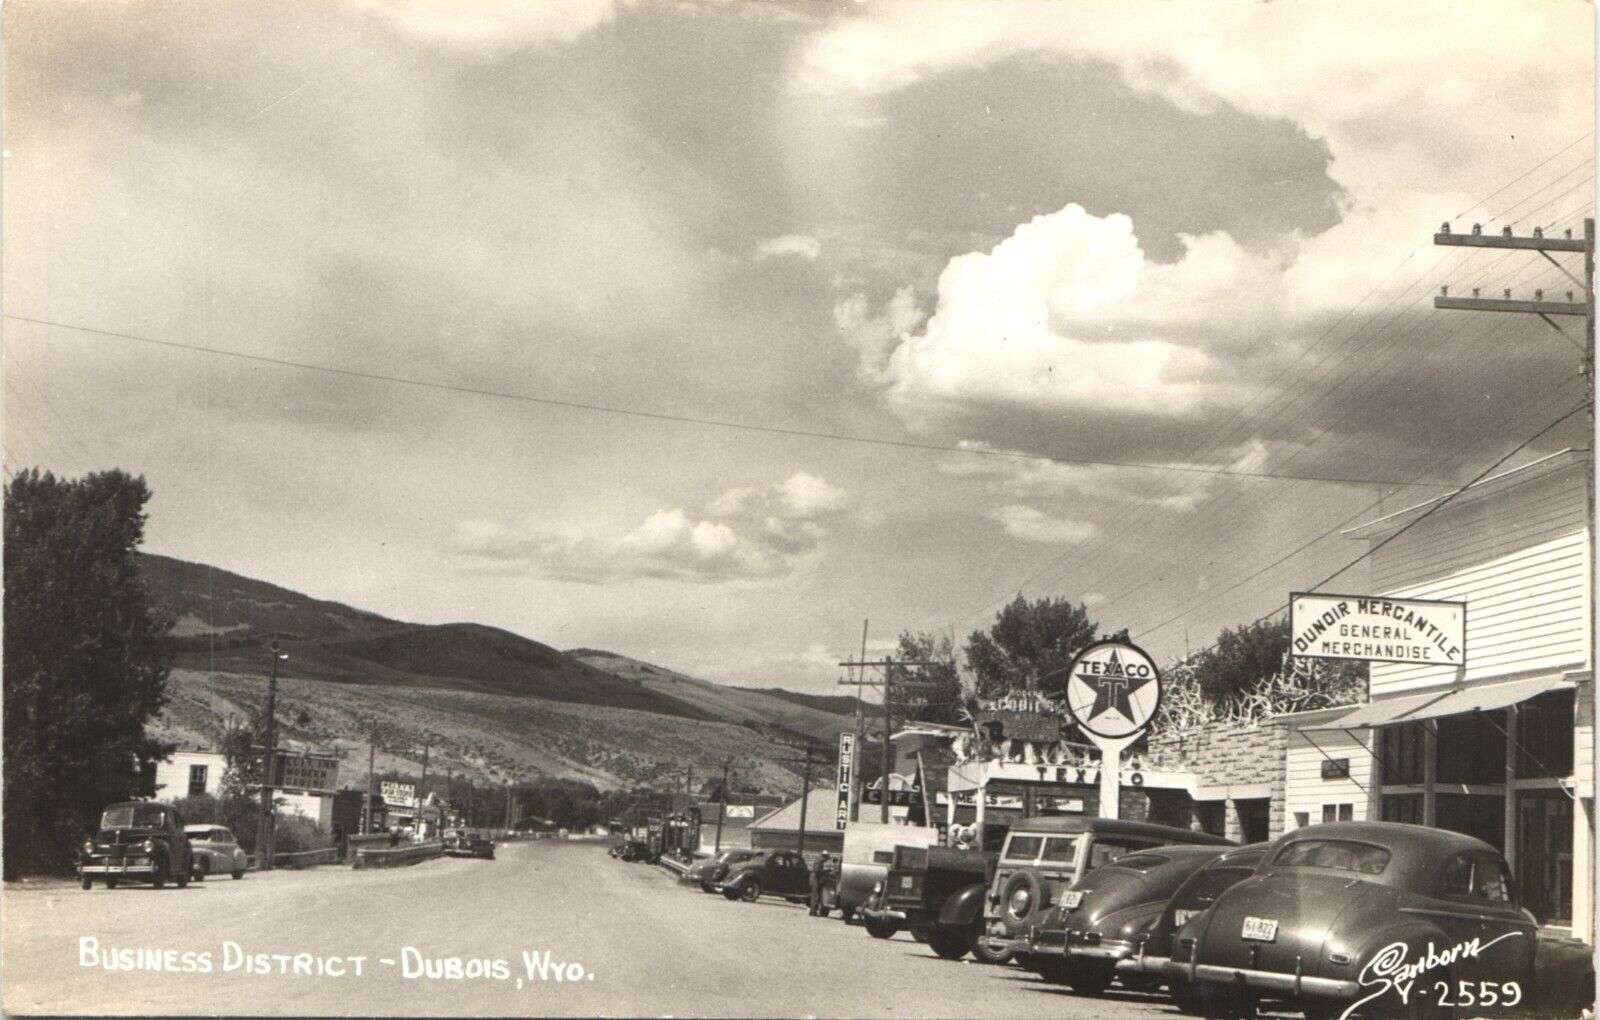 DUBOIS WYOMING BUSINESS DISTRICT c1950 real photo postcard rppc wy main street